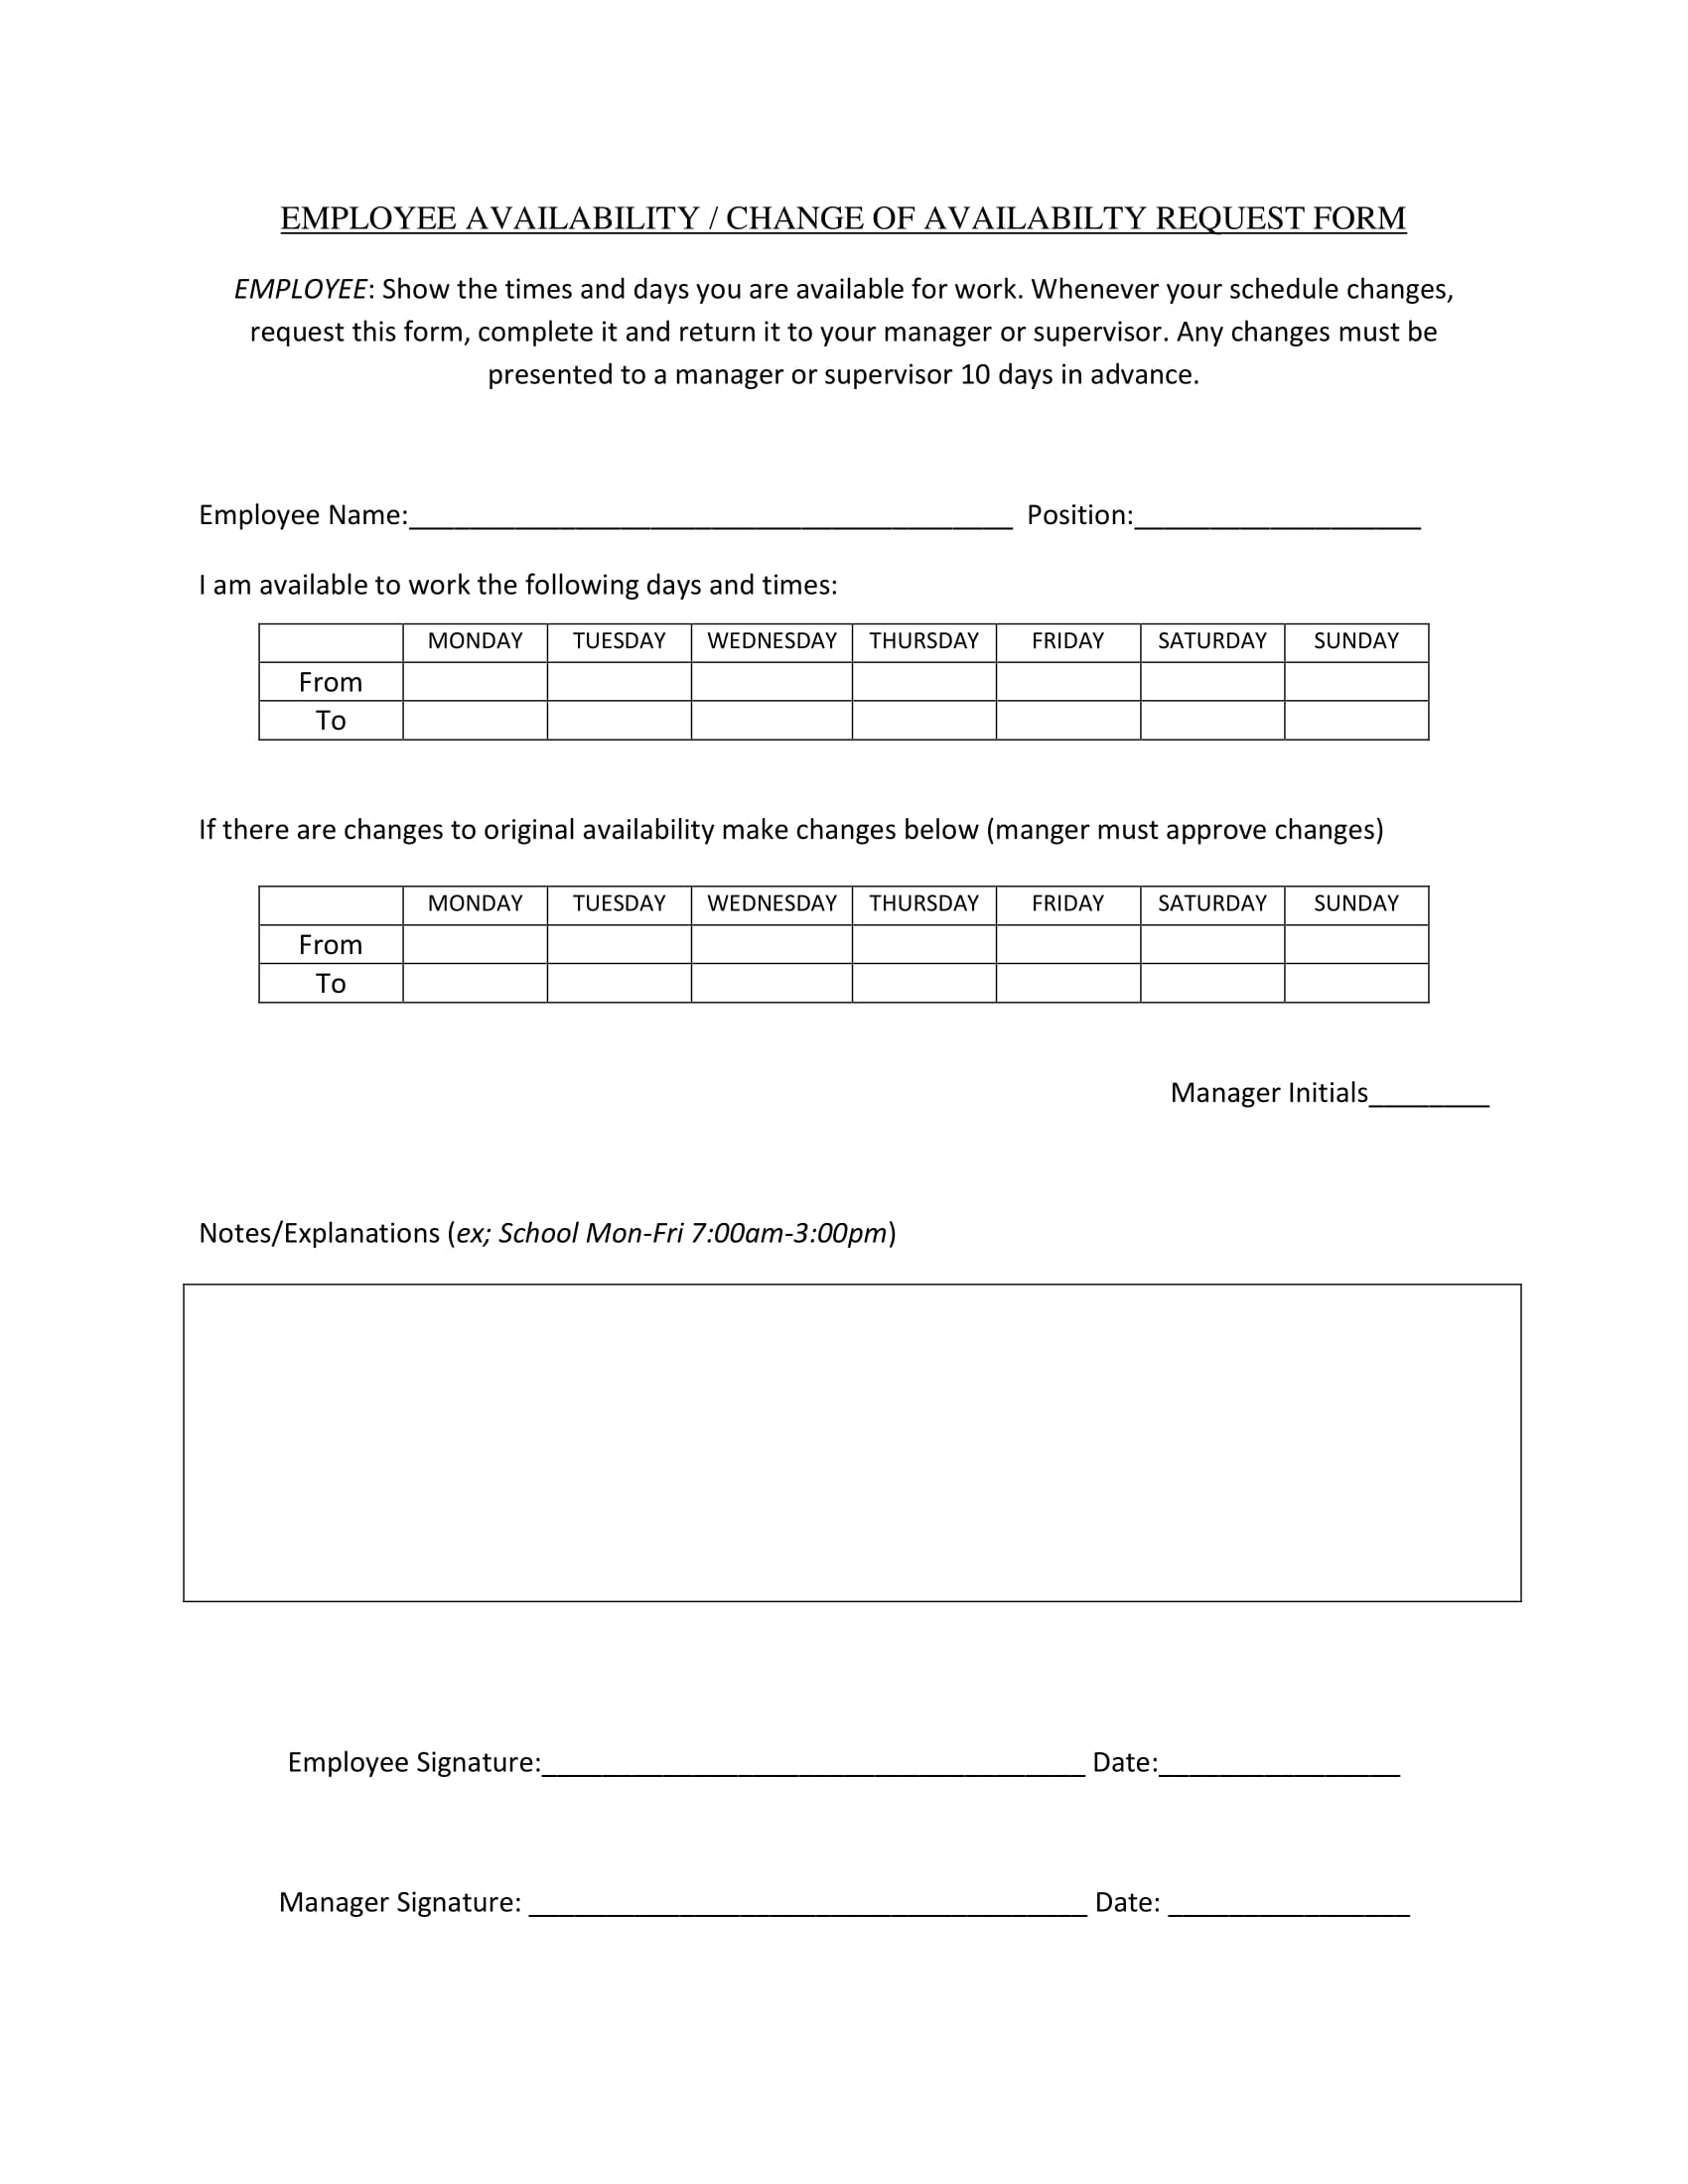 employee schedule availability form 1